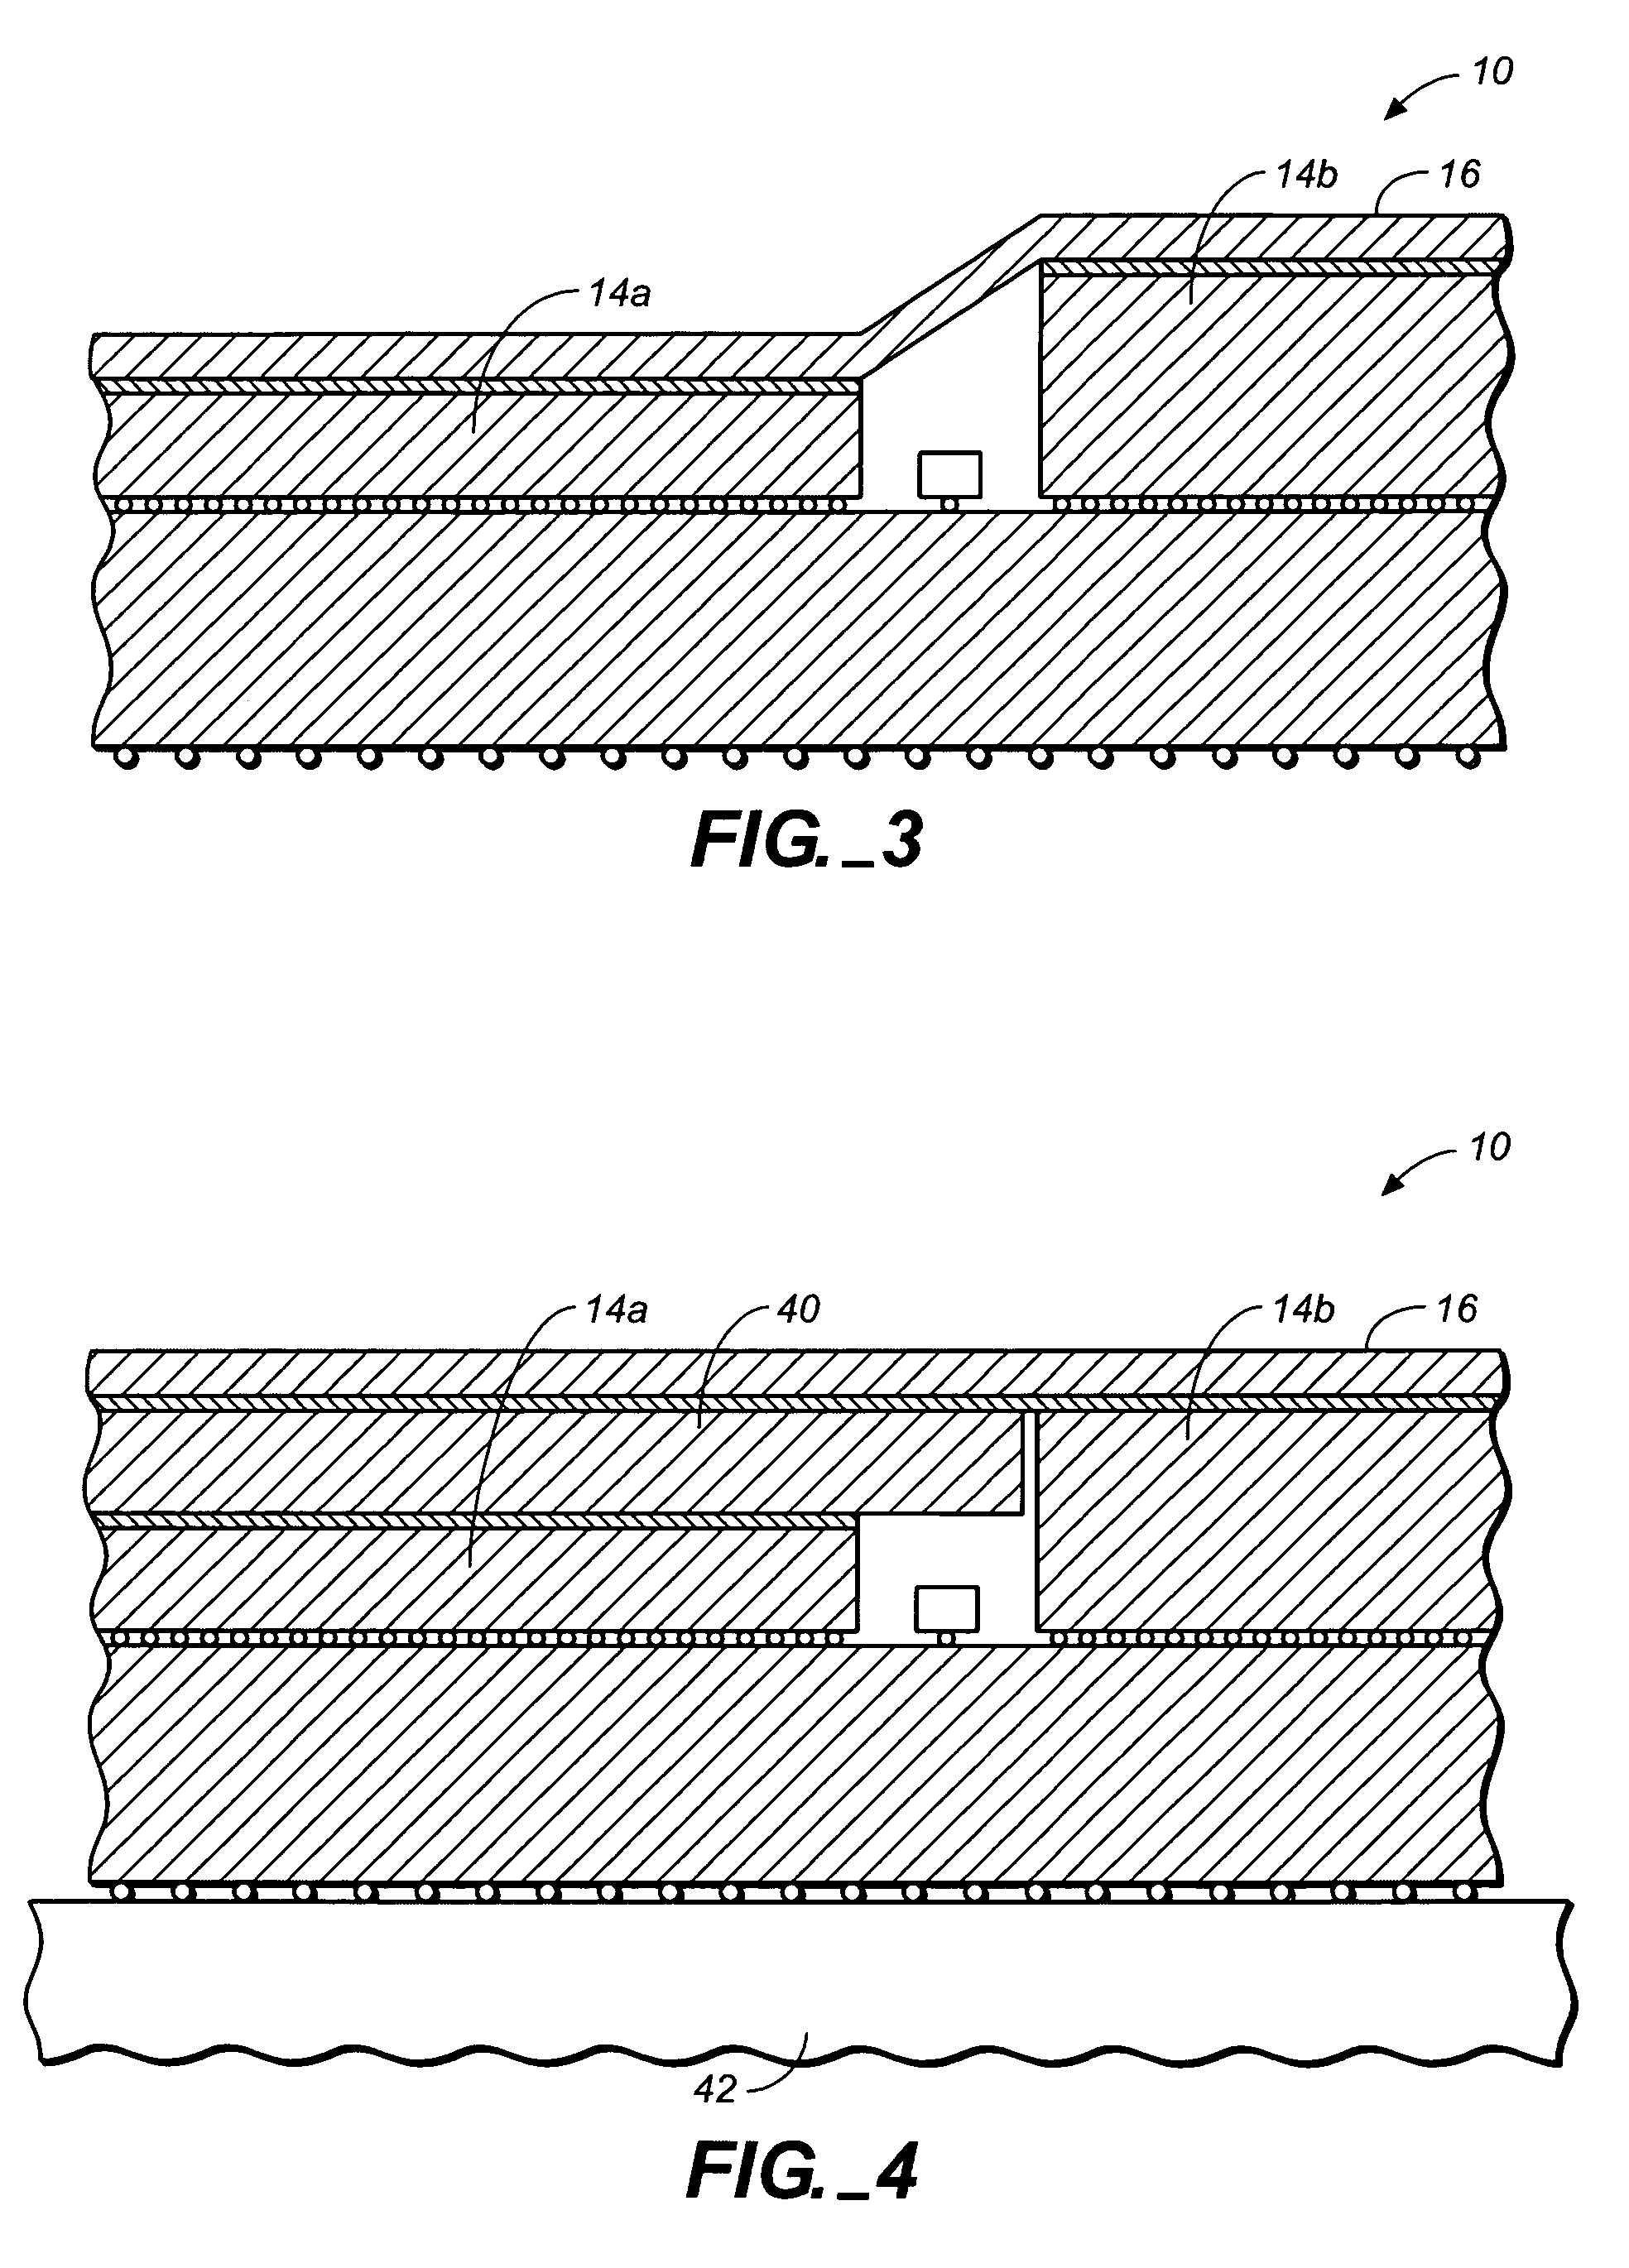 Multi-chip package having a contiguous heat spreader assembly